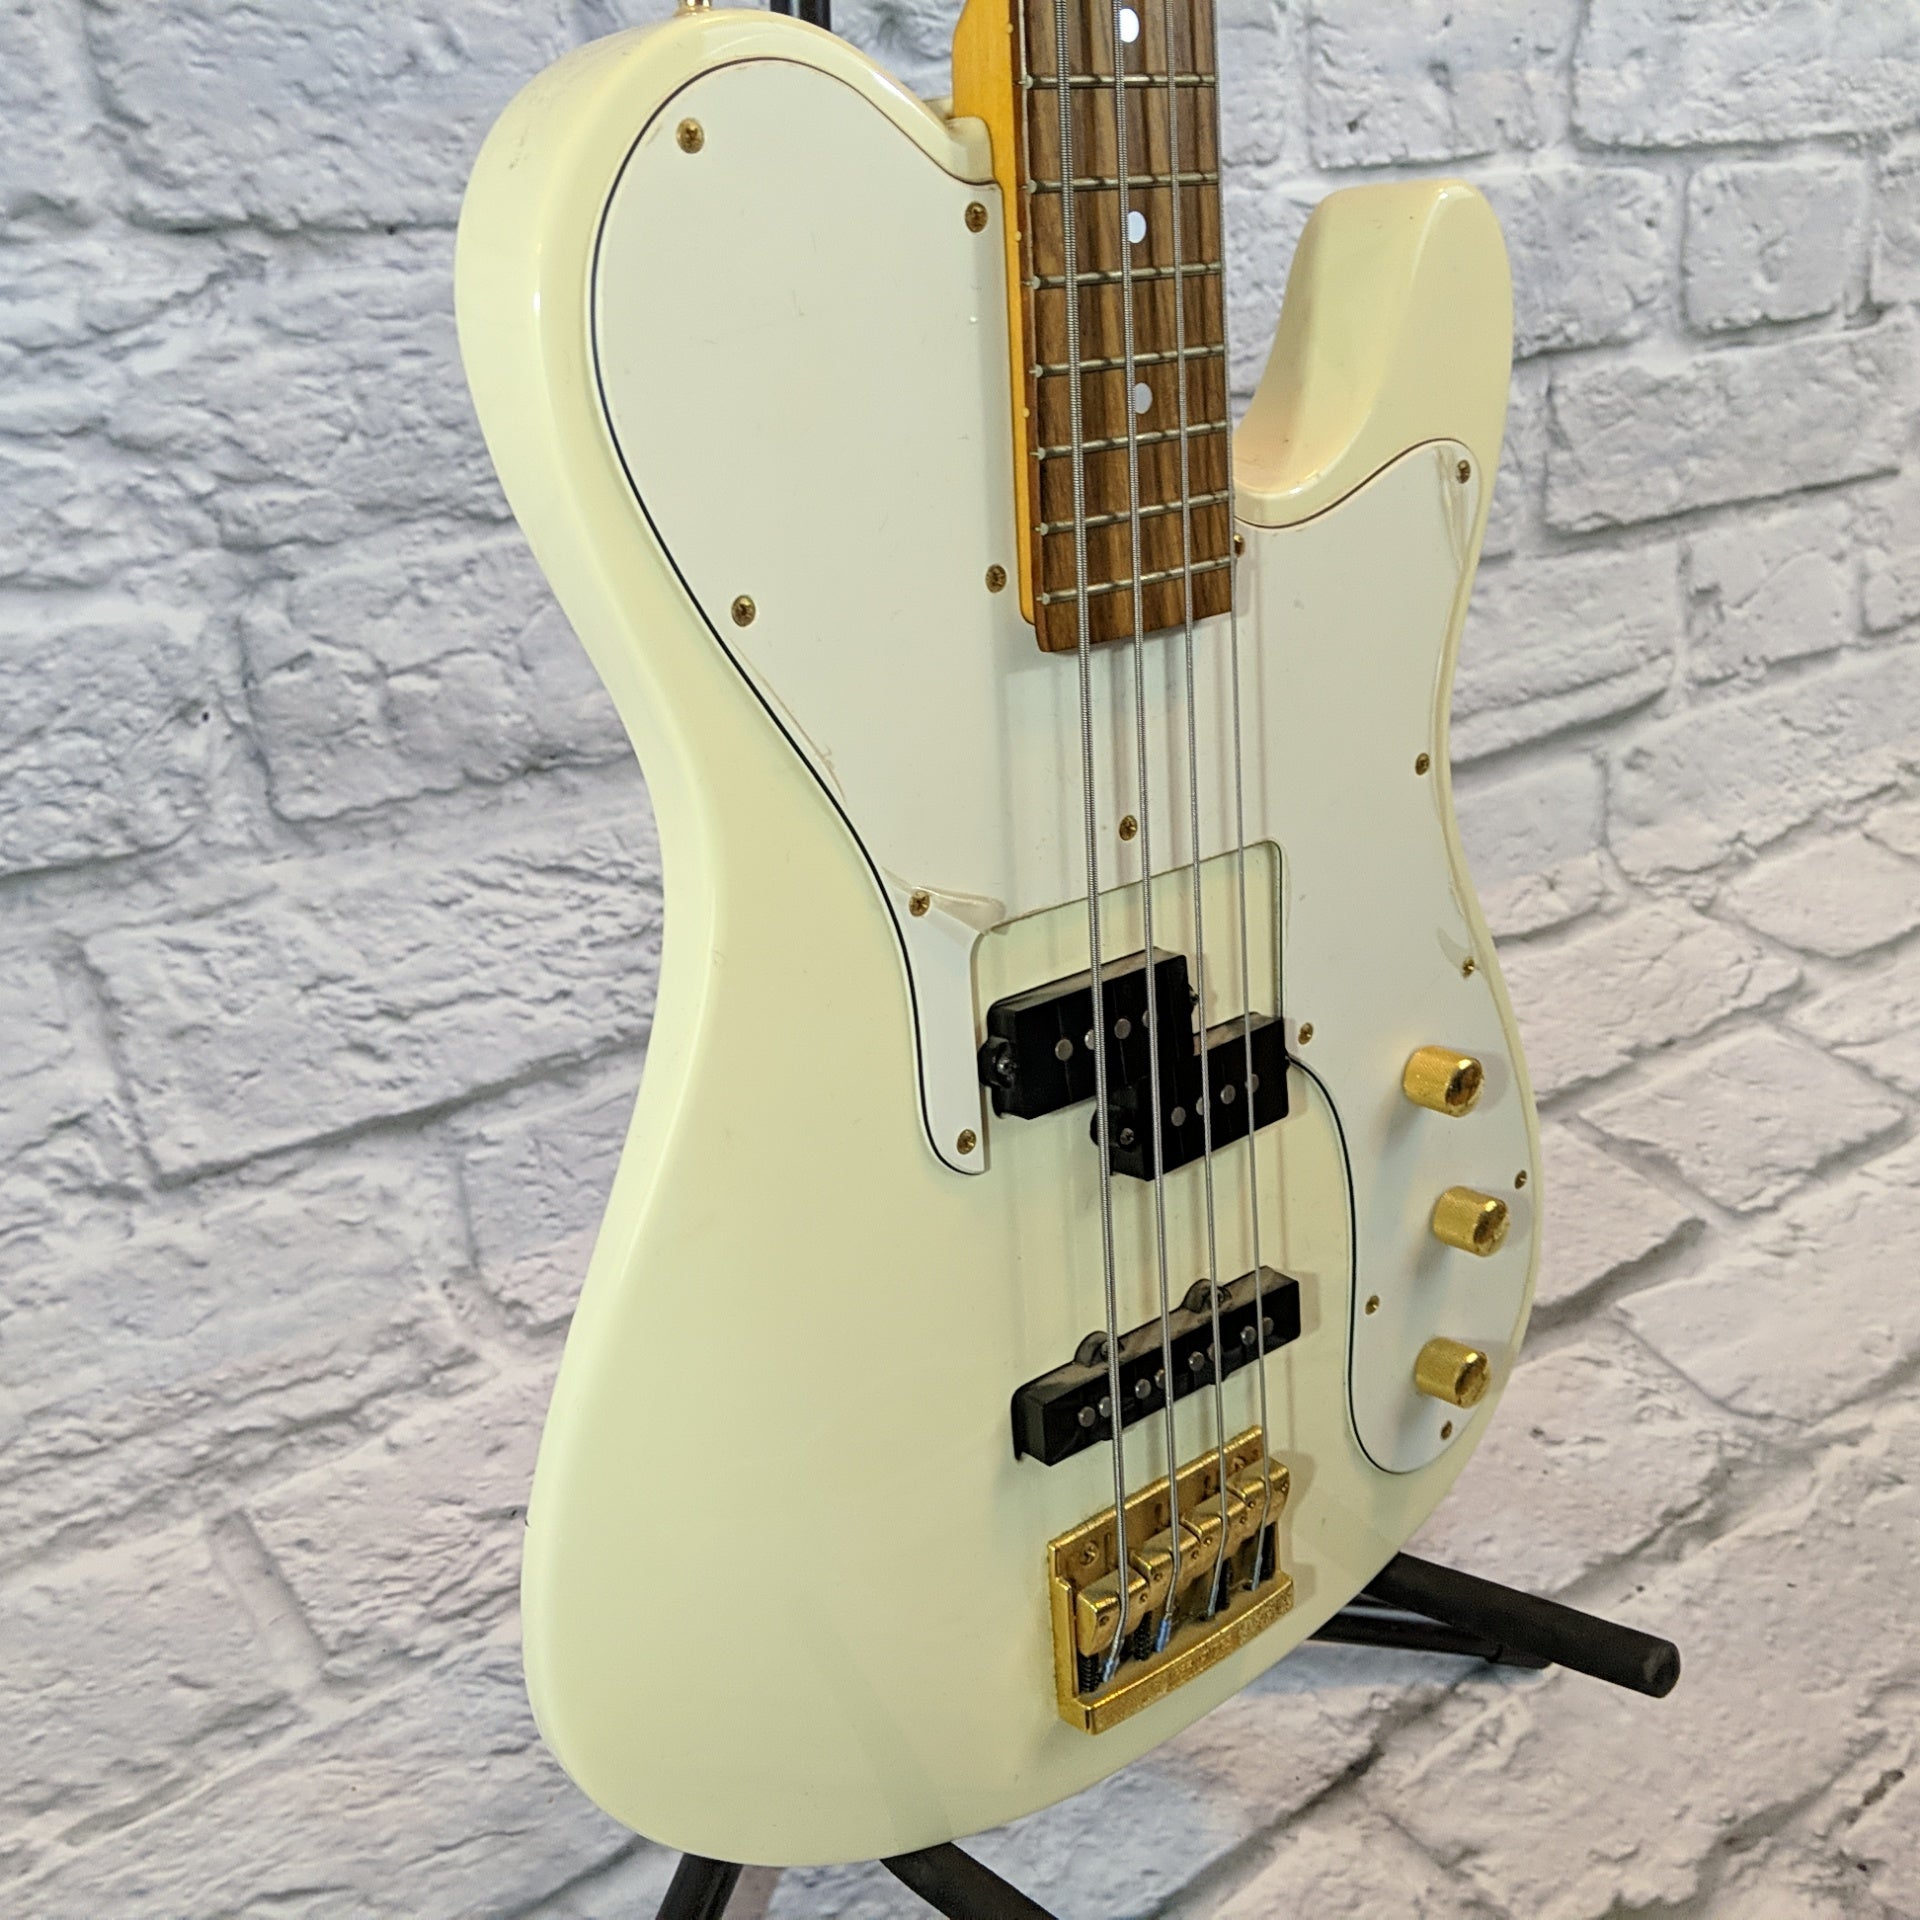 Fernandes TEB-1 Telecaster Bass Aged Olympic White MIJ w/case